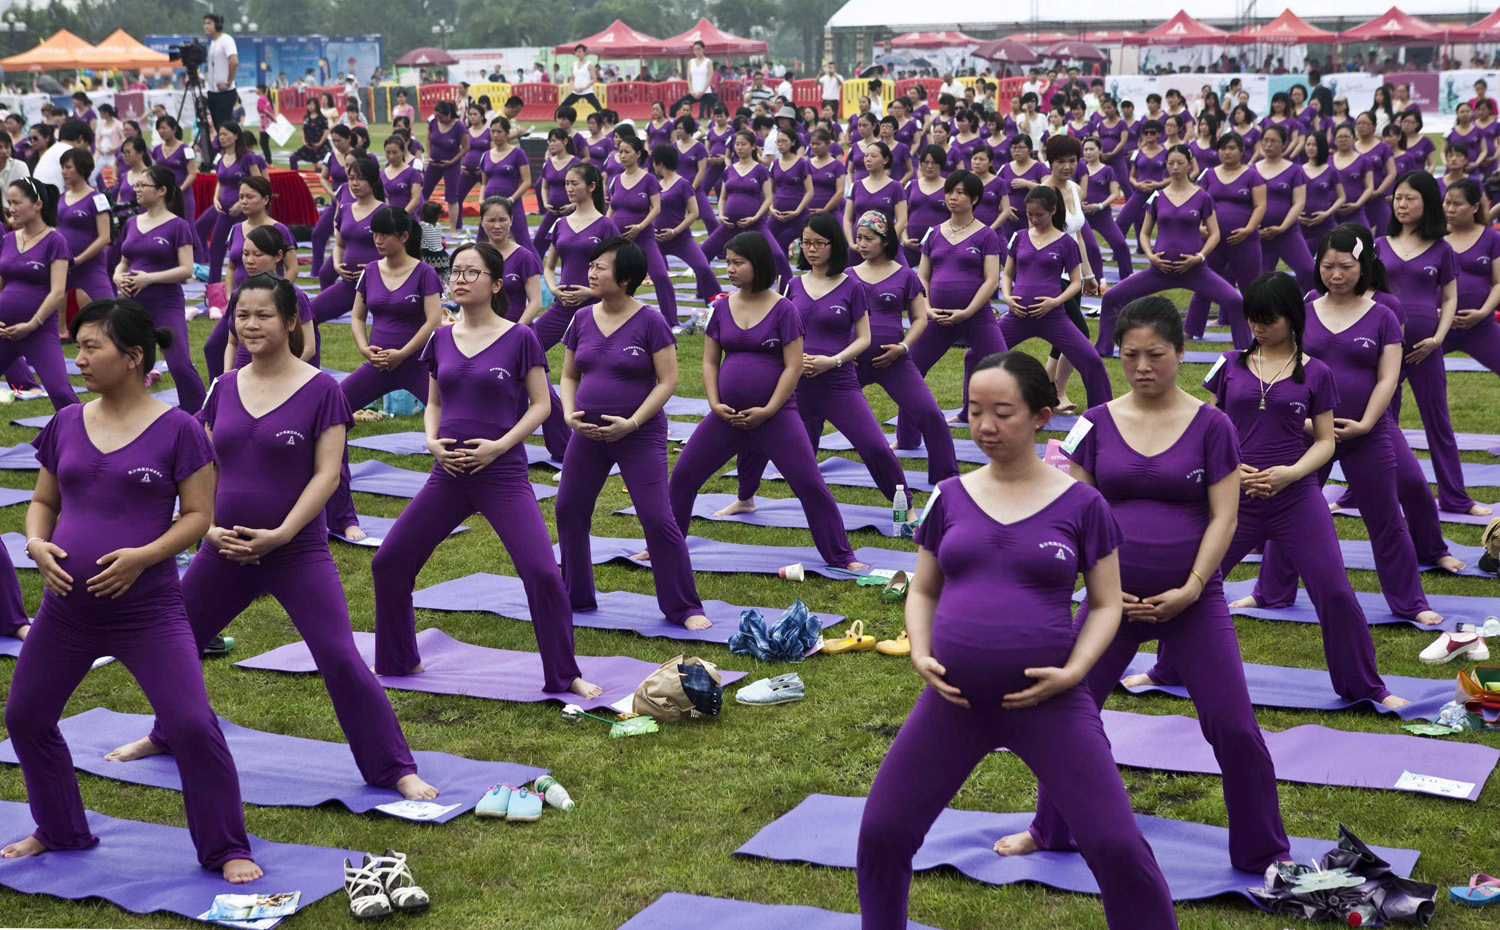 Pregnant women practice yoga as they attempt to break the Guinness World Record for the largest prenatal yoga class, in Changsha